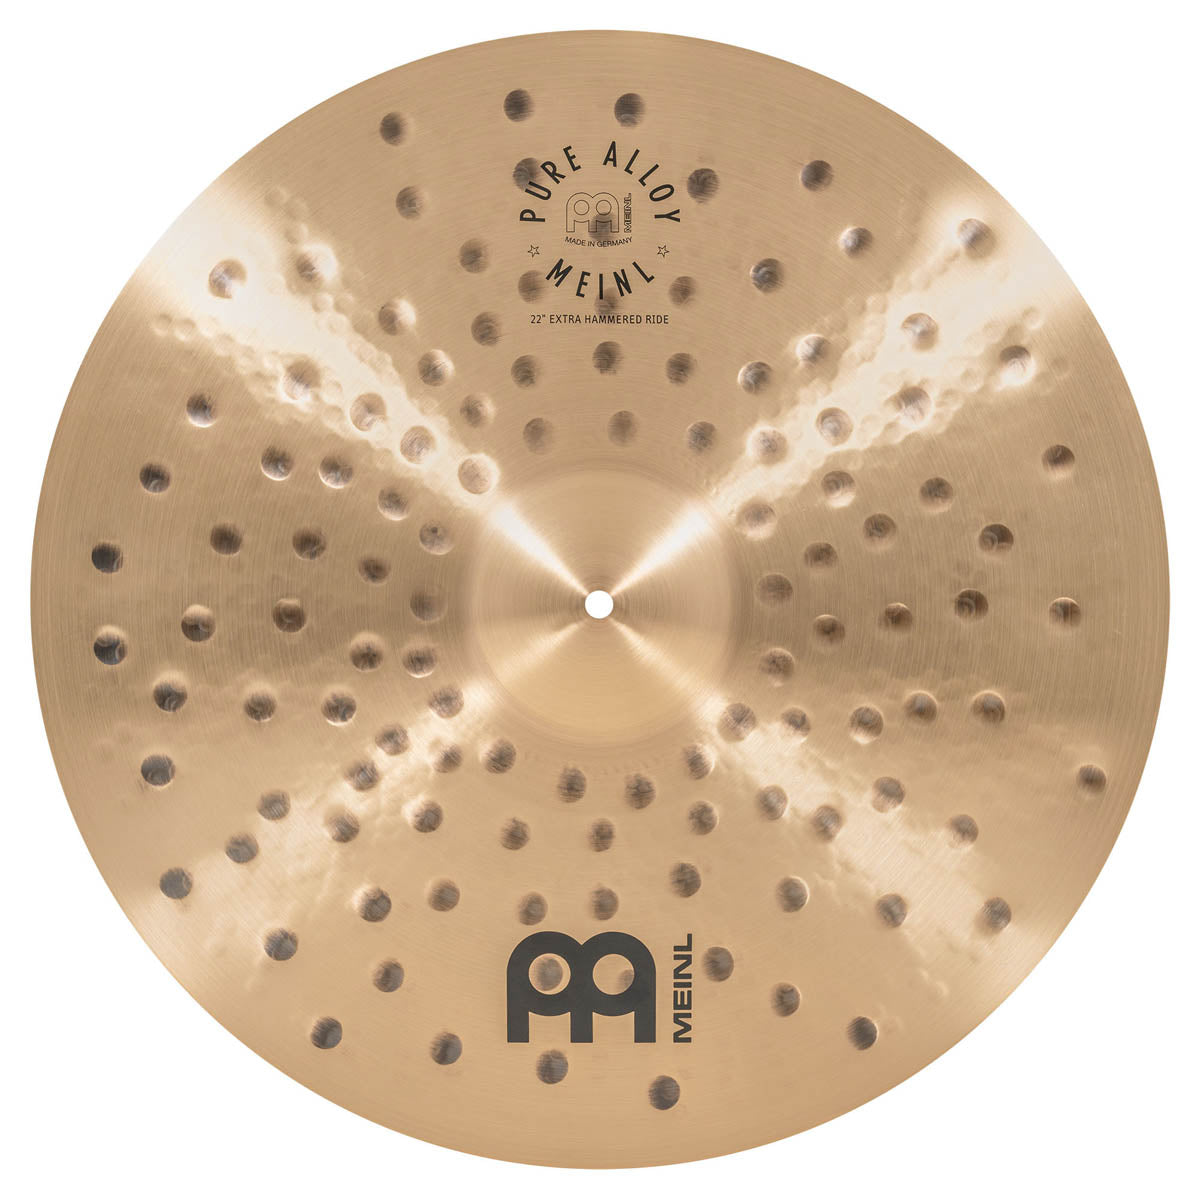 Meinl Pure Alloy 22" Extra Hammered Ride Cymbal